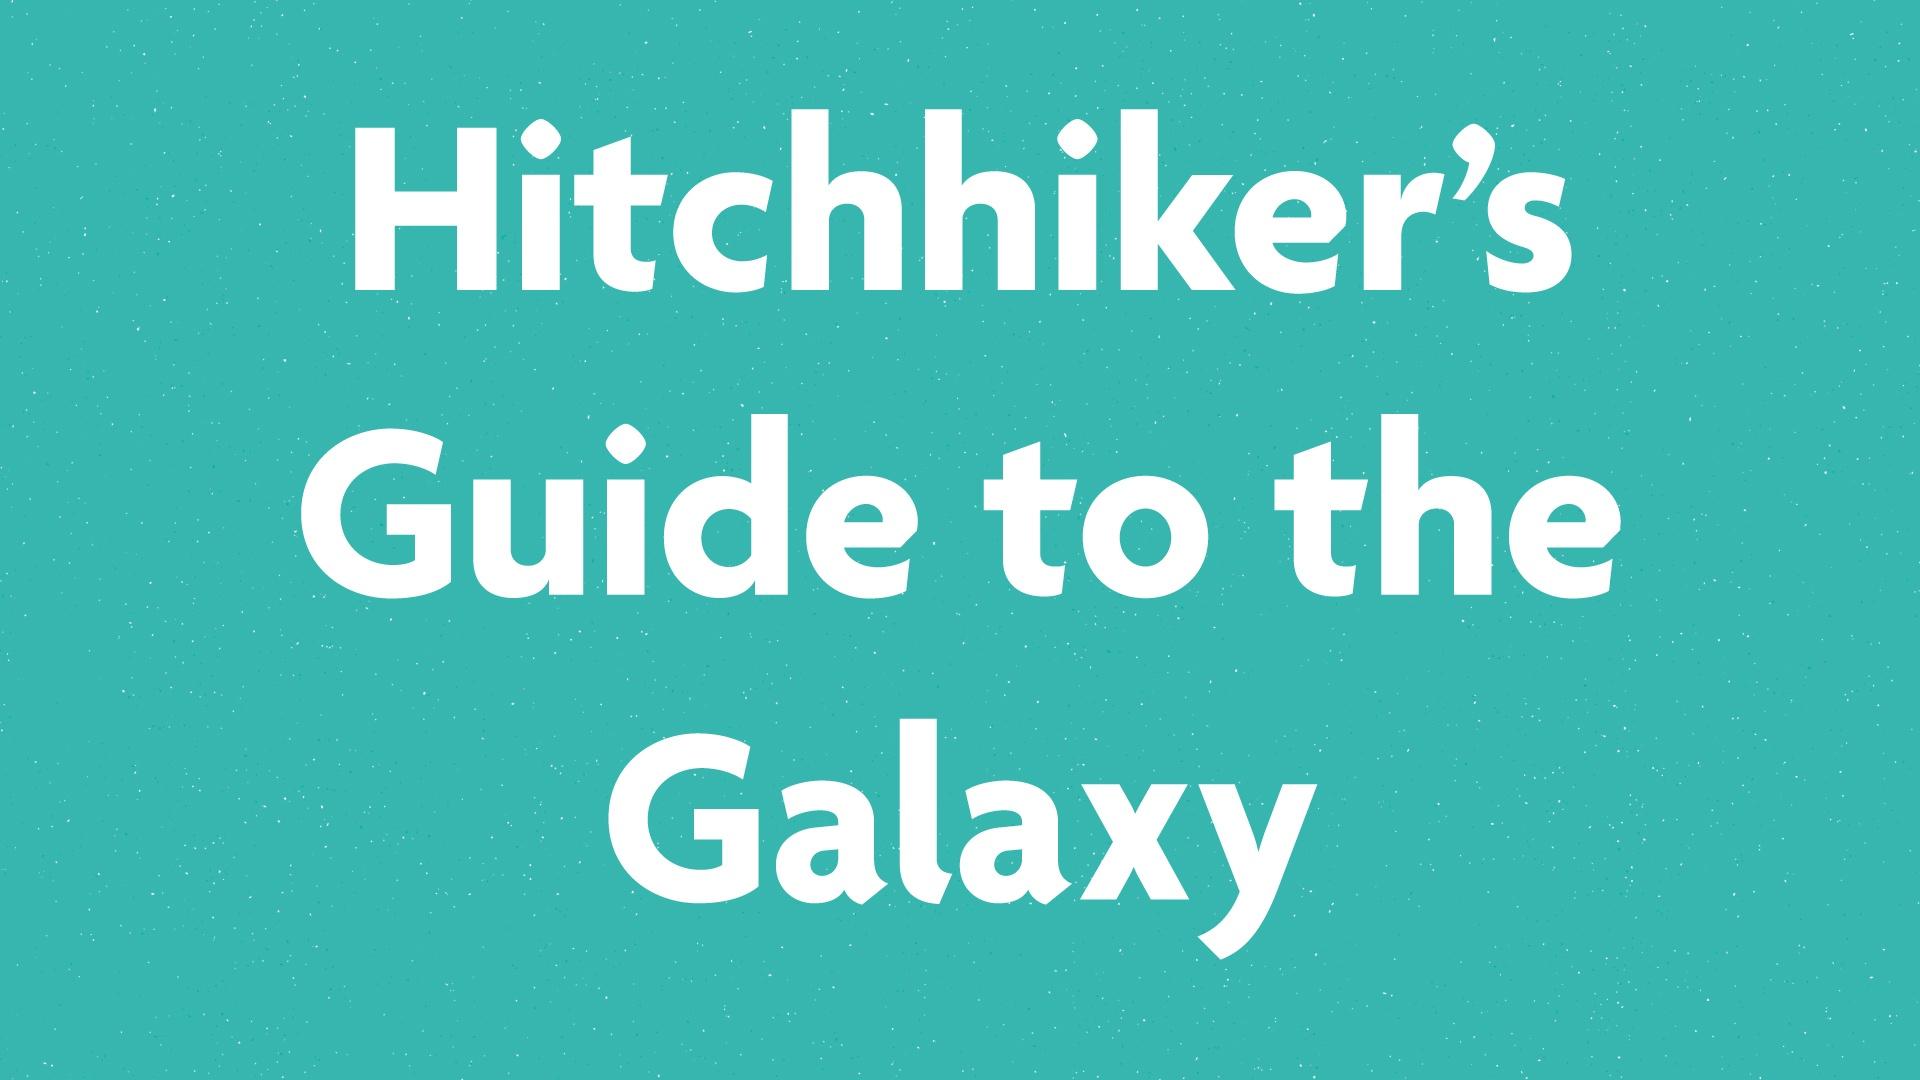 Hitchhiker's Guide to the Galaxy book submission card on a green background.